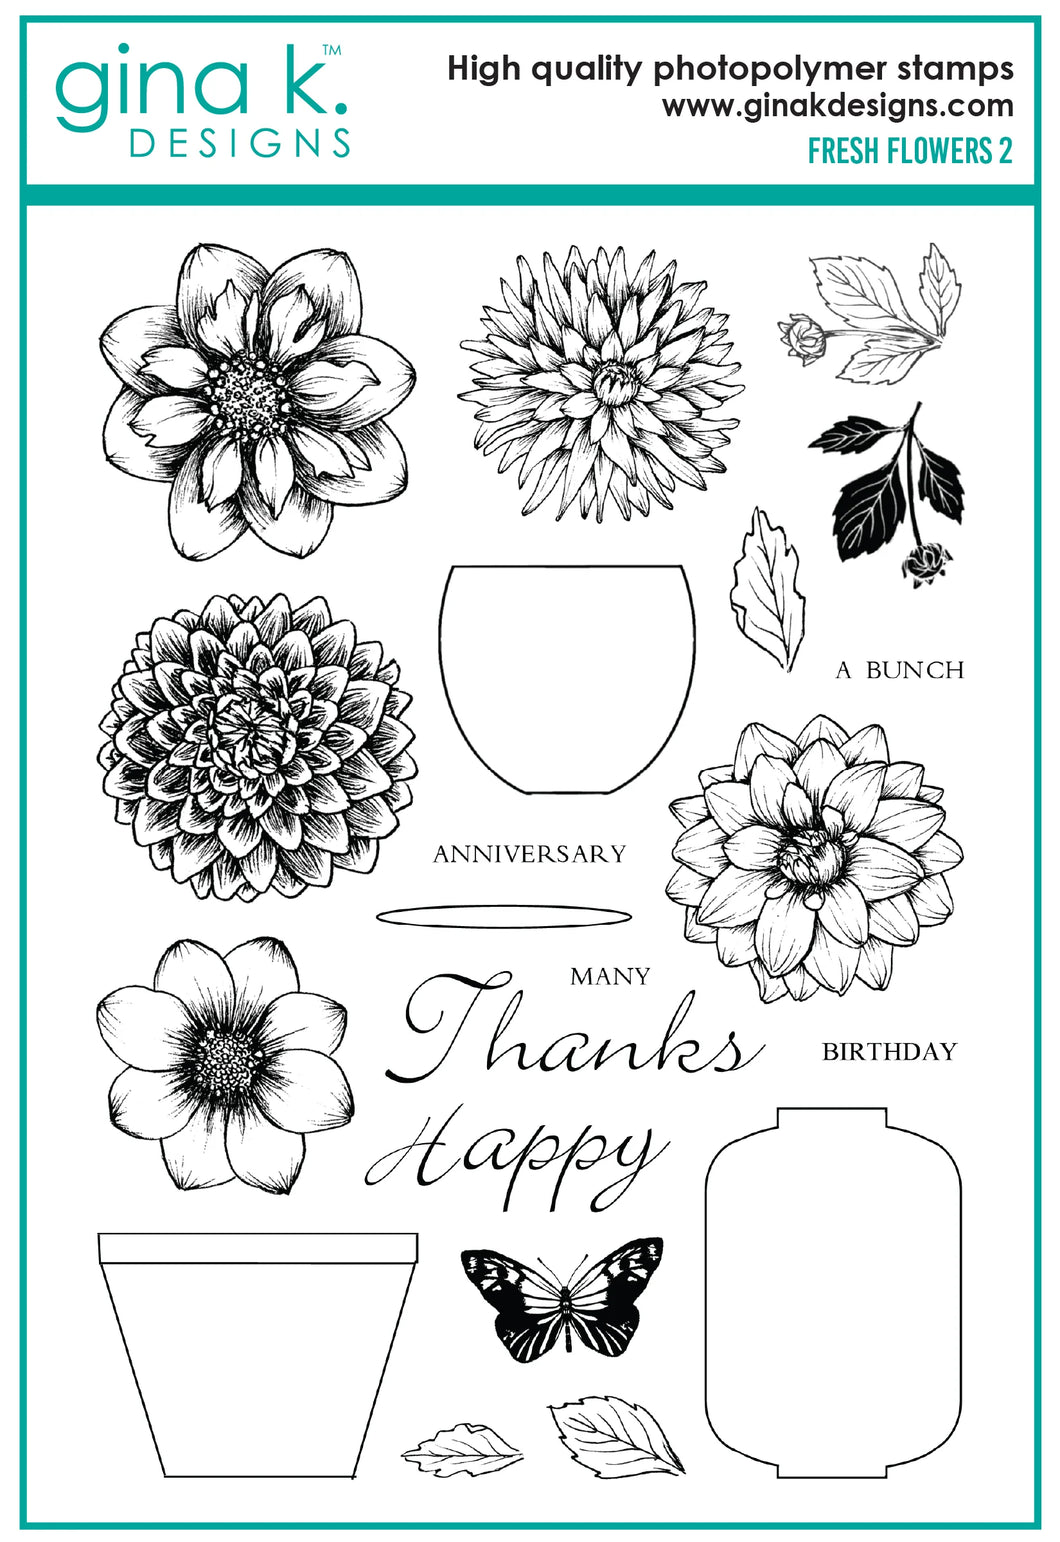 Gina K. Designs - Stamp - Fresh Flowers 2. The follow up to the popular Fresh Flowers from Melanie Muenchinger. Intricate line art elements and containers for all your coloring media or with the bold images from the first set for 2 step stamping.  Available at Embellish Away located in Bowmanville Ontario Canada.